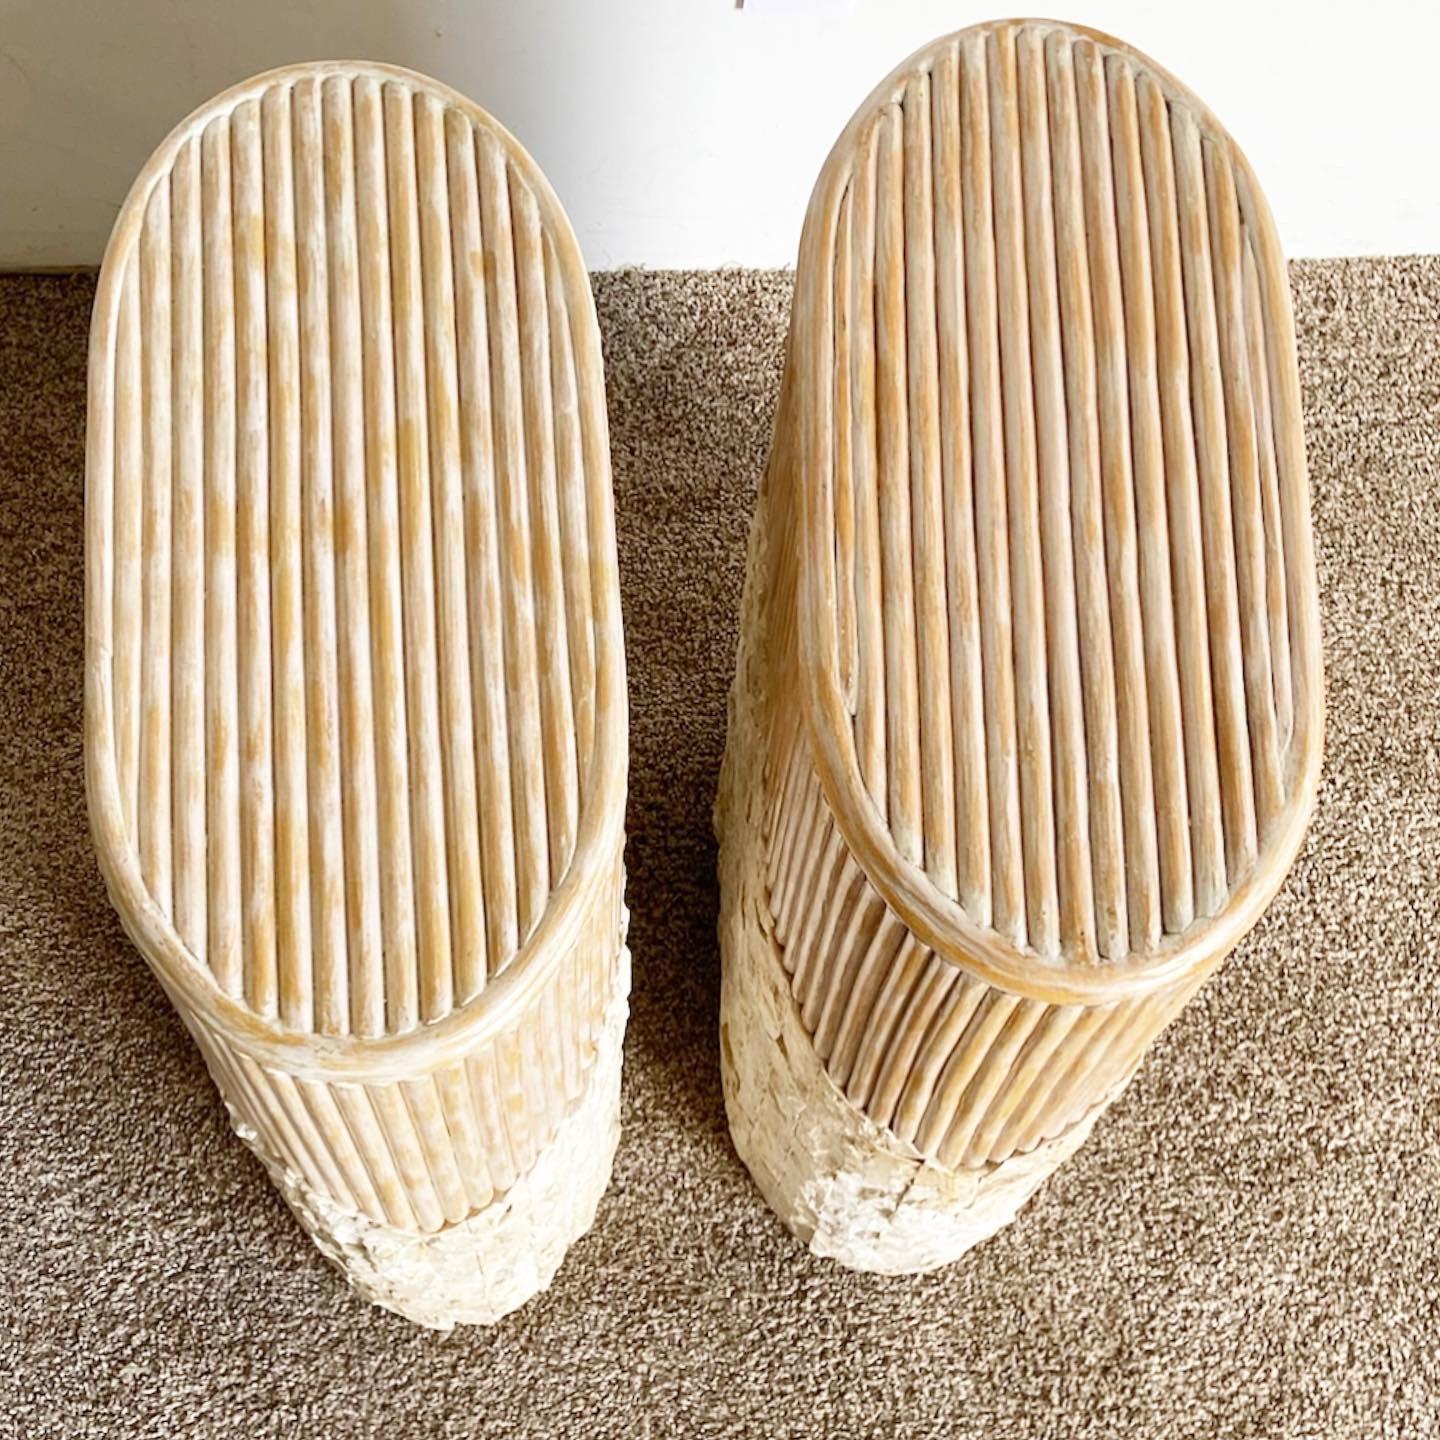 Bohemian Boho Chic Tessellated Stone and Split Reed Pedestals, a Pair For Sale